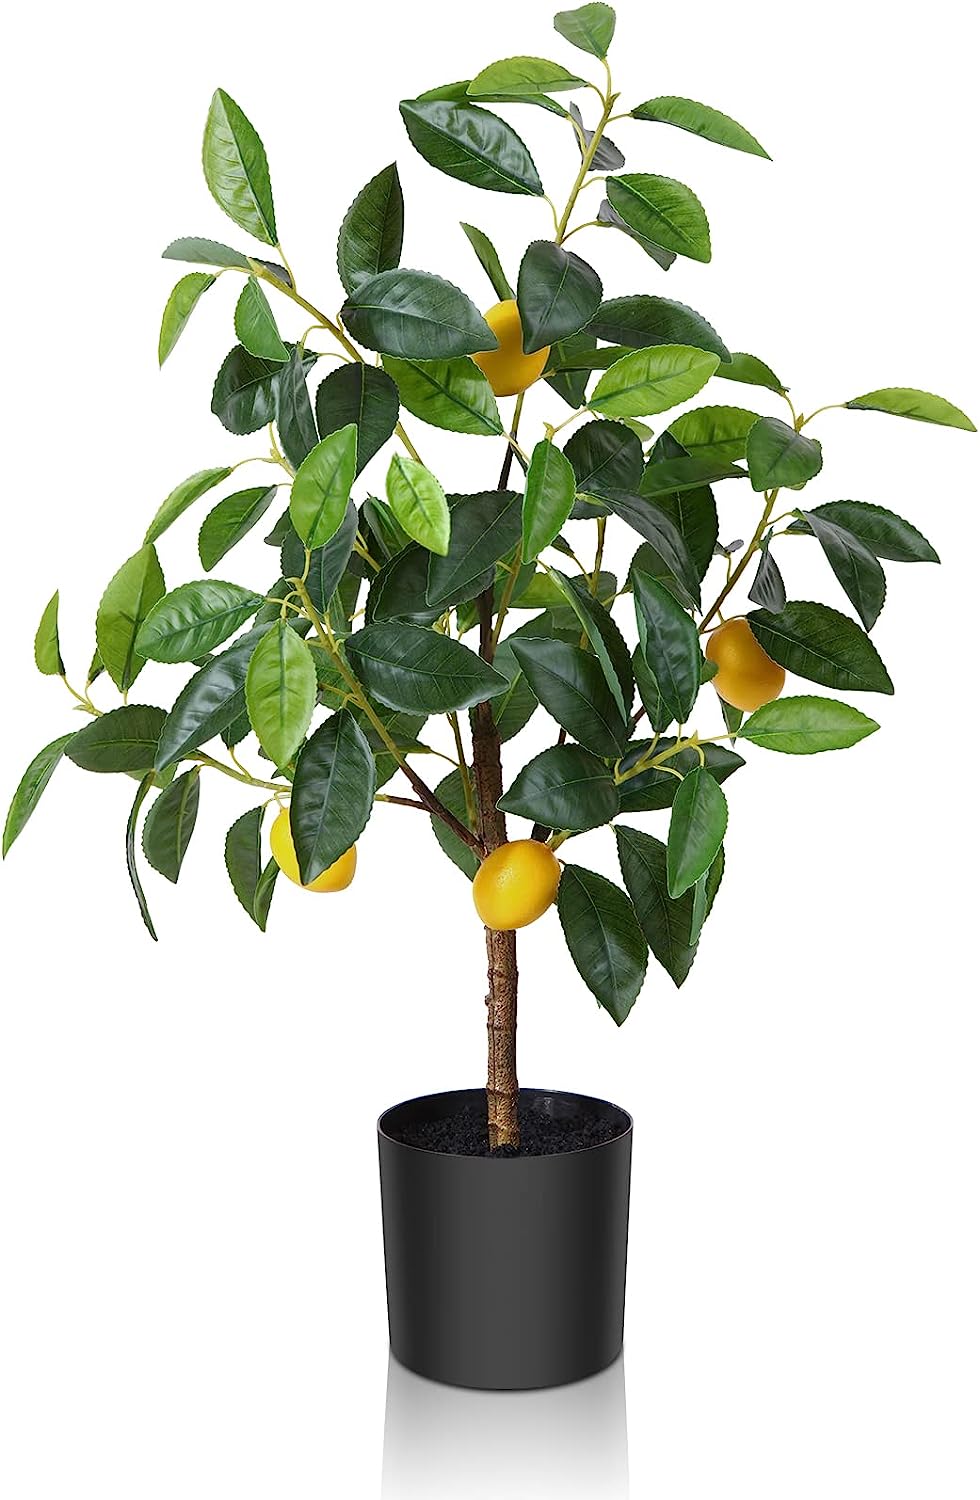 Artificial Lemon Tree, 4FT Faux Tree with 396 Leaves and 9 Plastic Lemon Fruits Graceland Home and Living